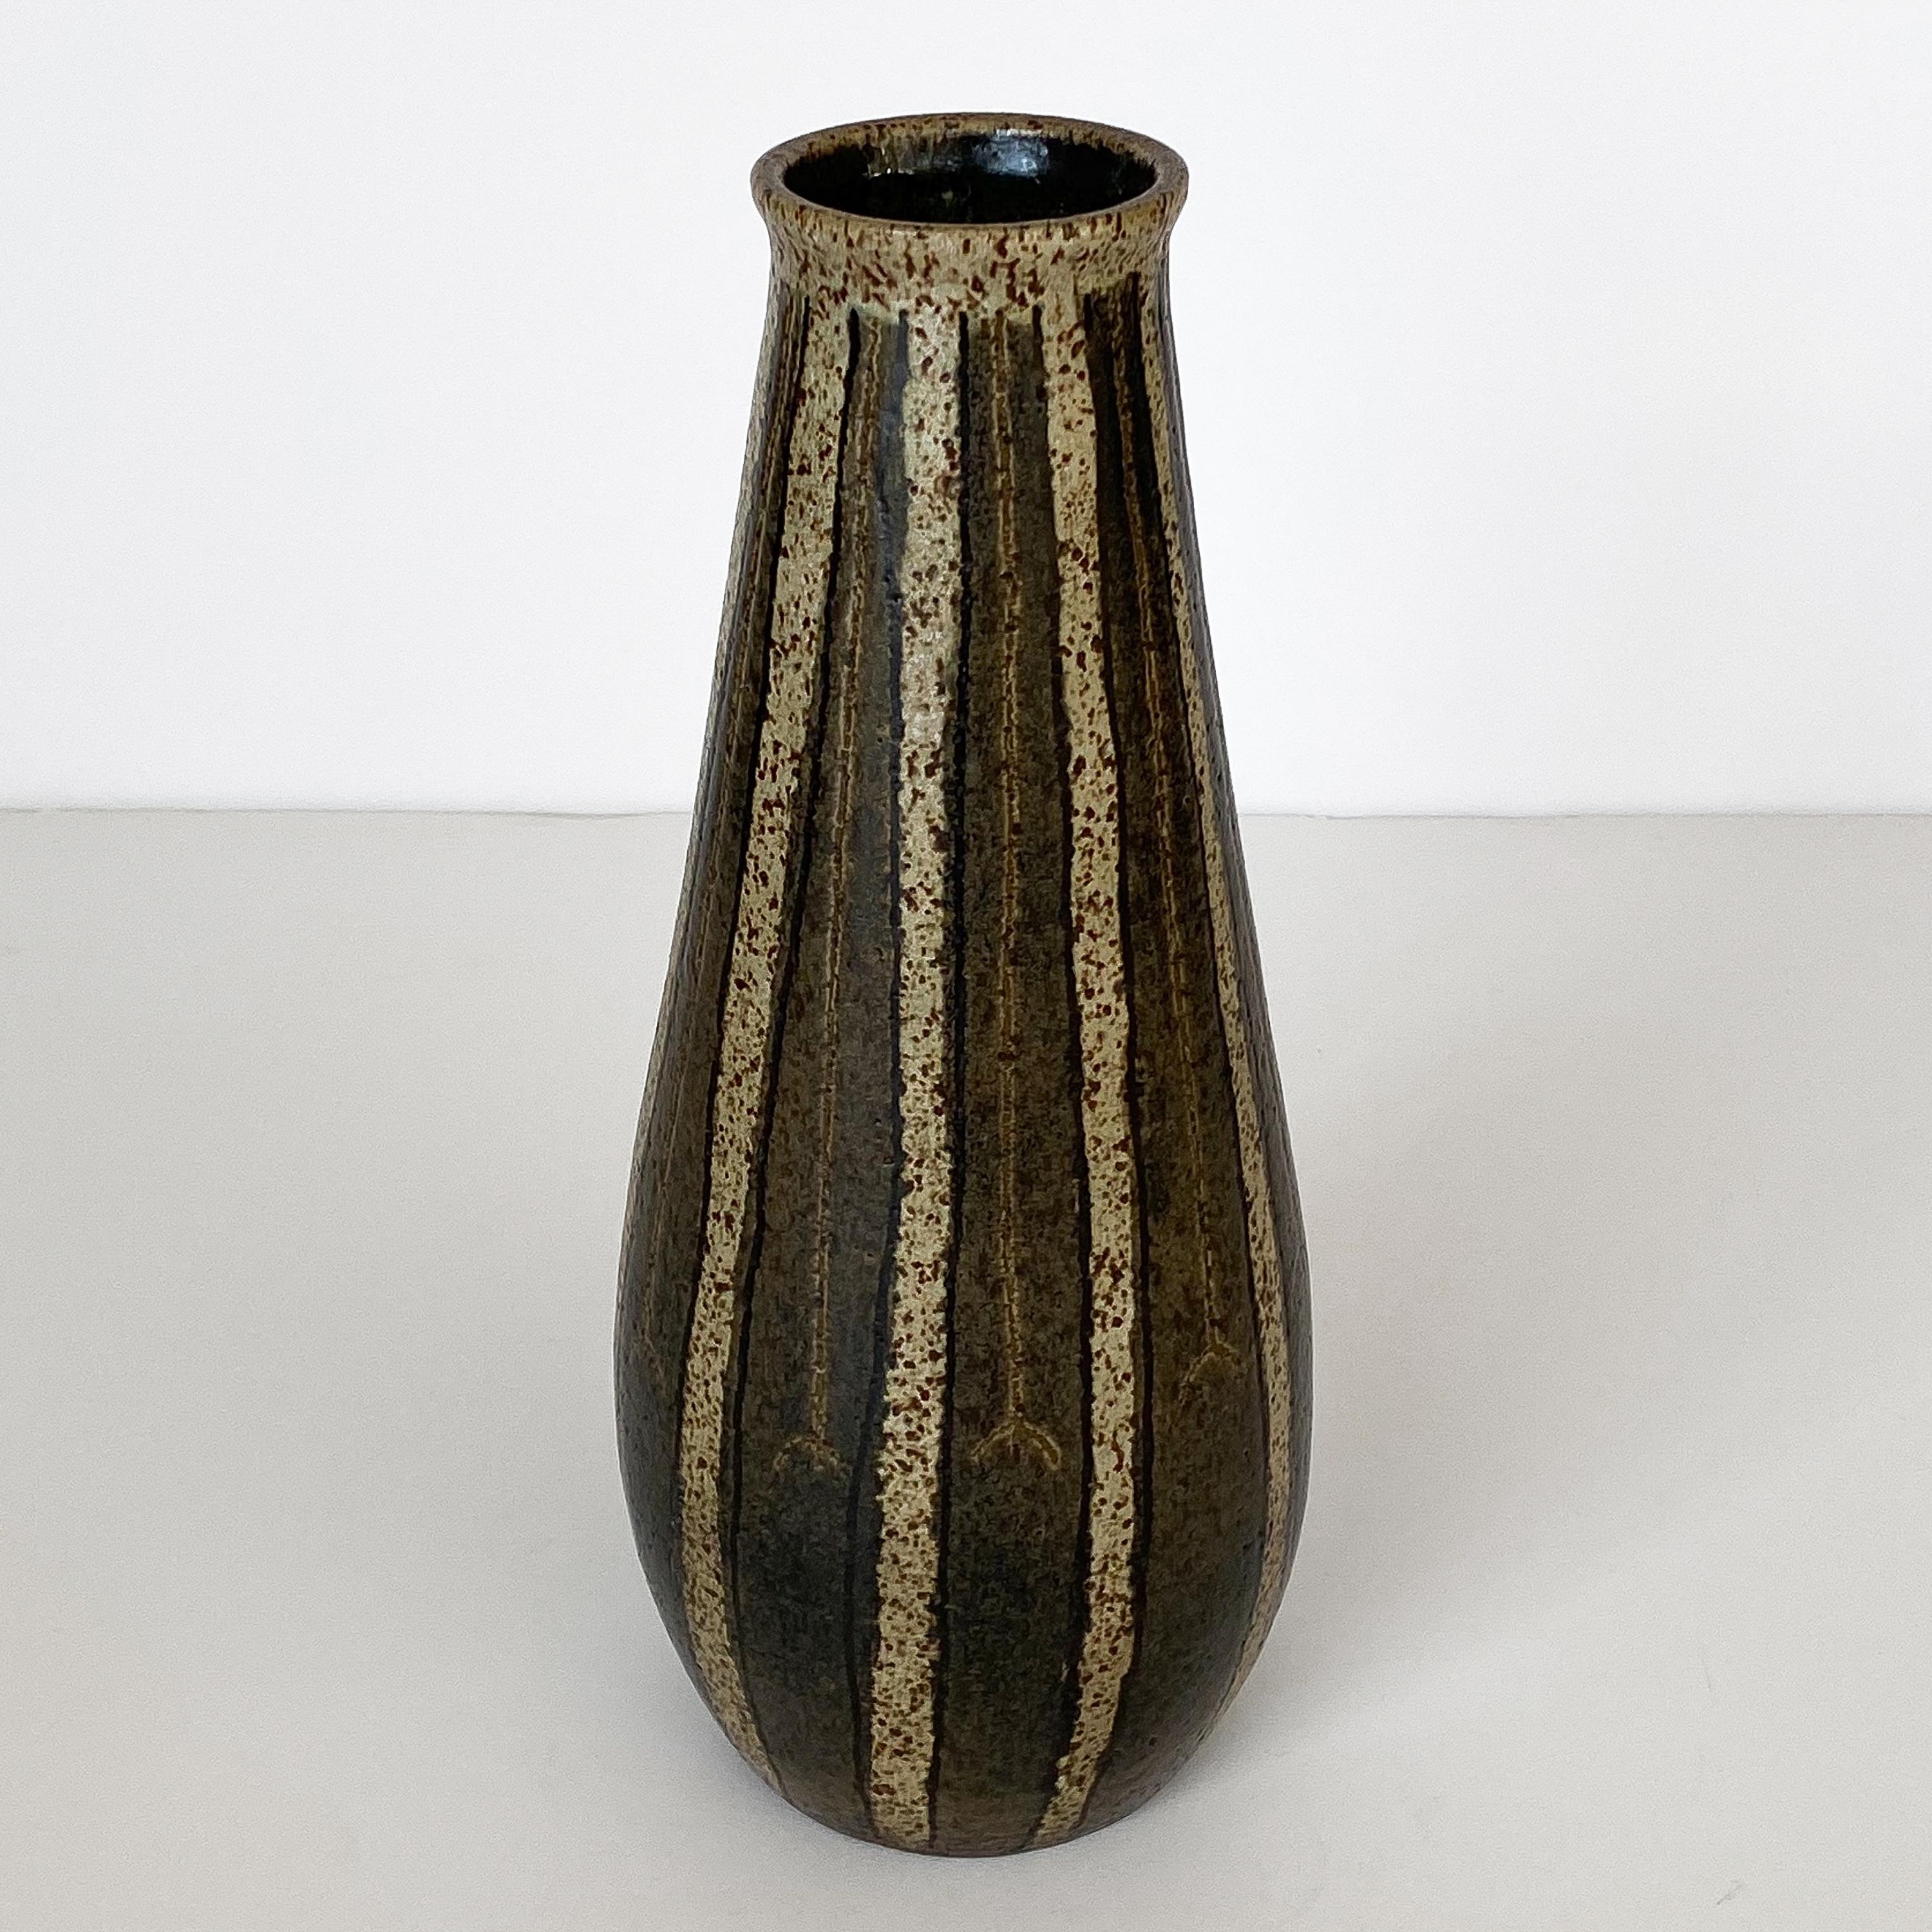 A Studio Pottery vase glazed in earth tones of browns, tan and black with striped pattern. Signed in Greek Alphabet to underside. Illegible. Measures: Overall 12.75